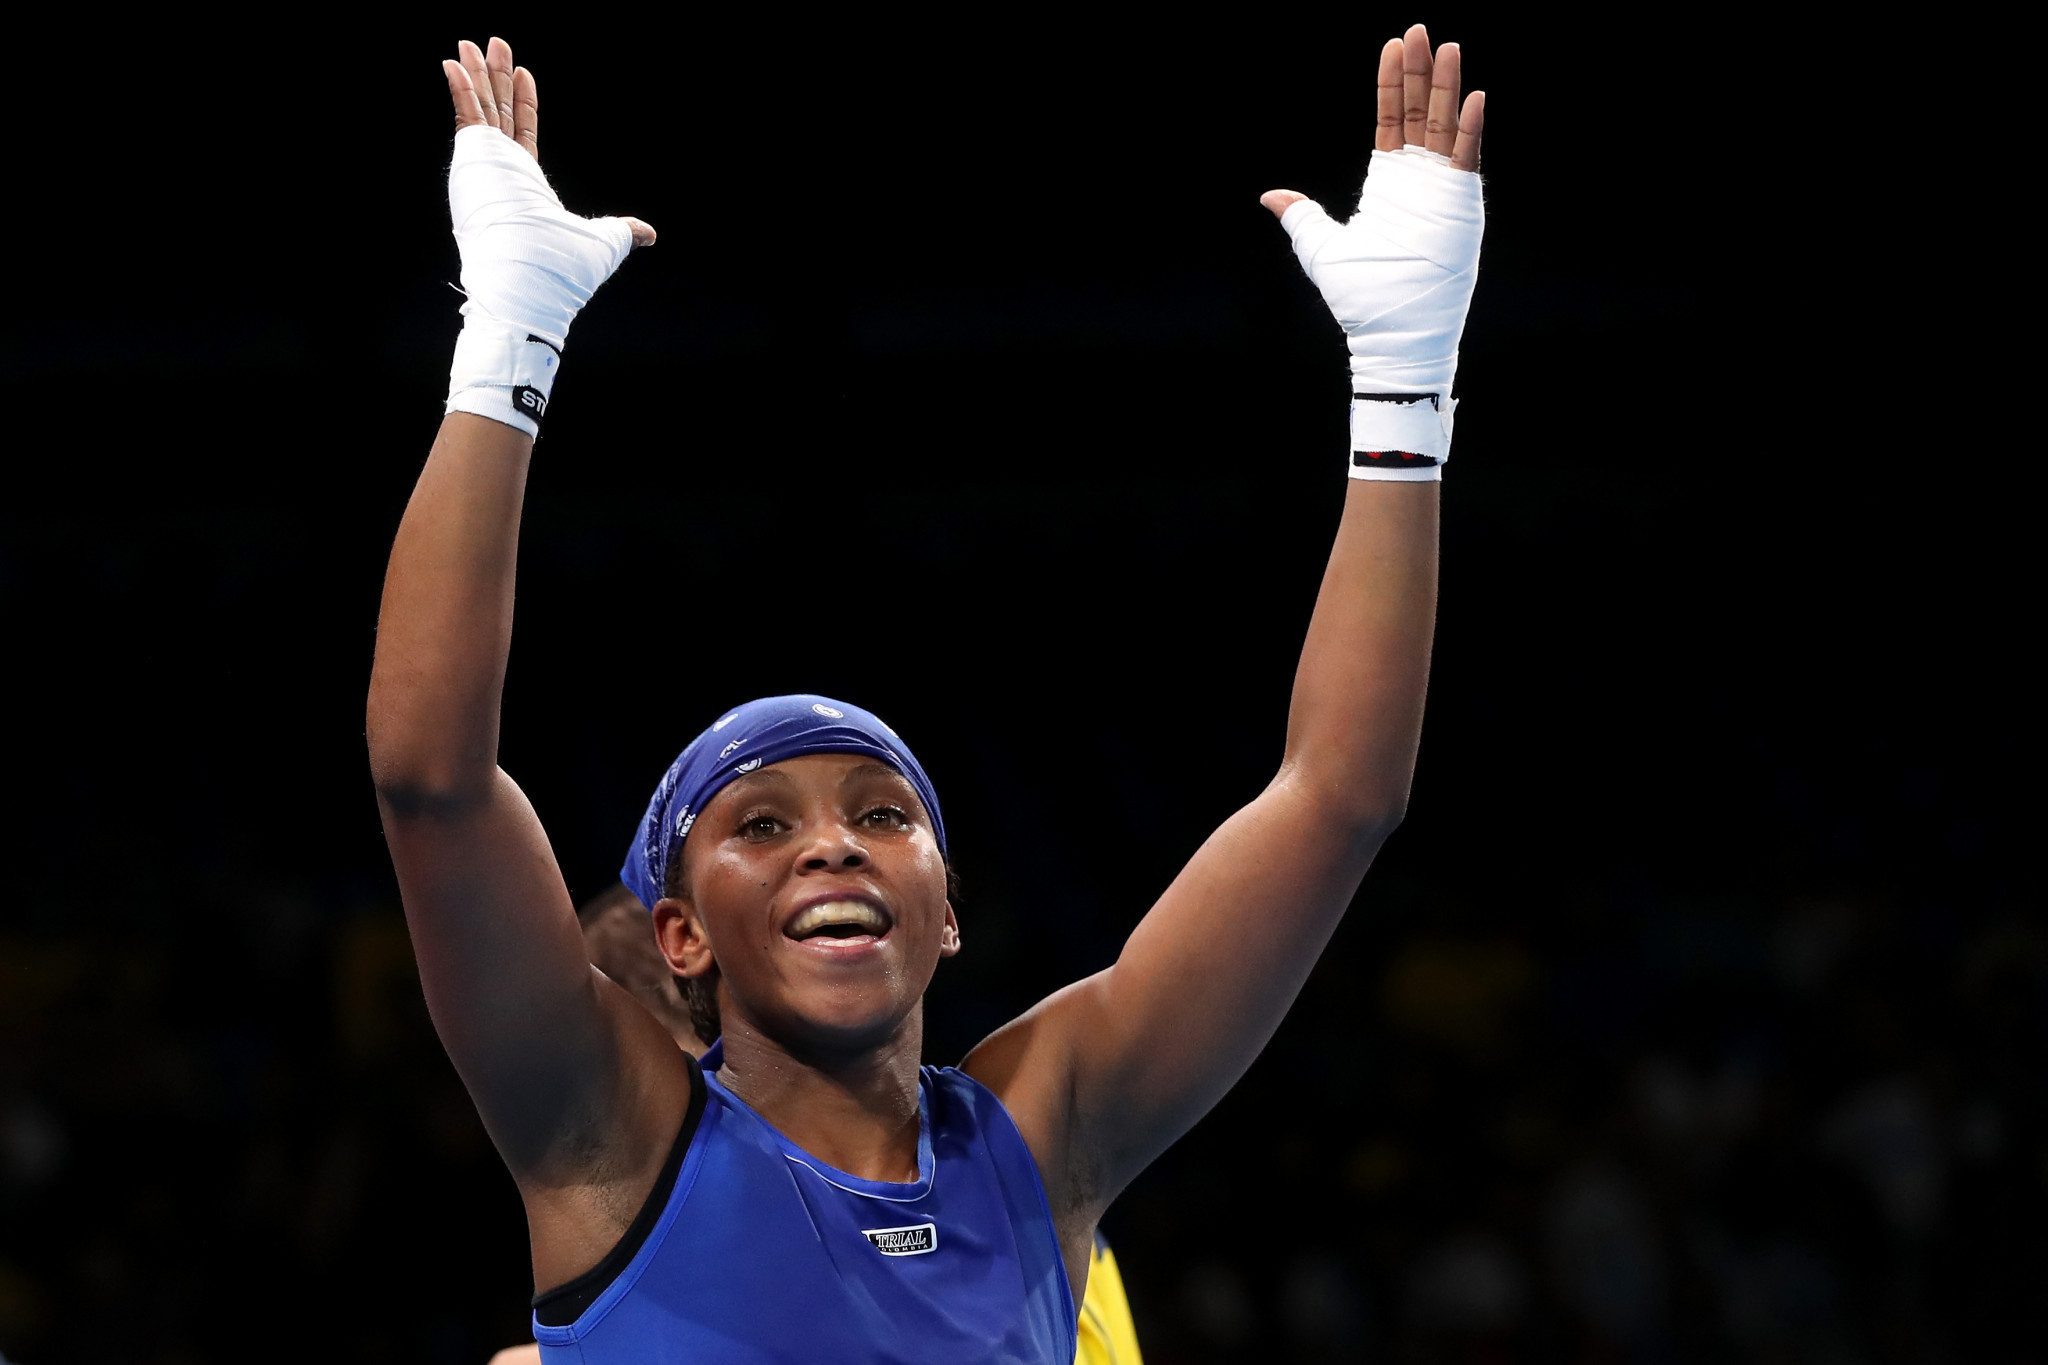 Ingrit Valencia of Colombia, a bronze medallist at the Rio 2016 Olympics, triumphed in the flyweight division in Guayaquil ©Getty Images